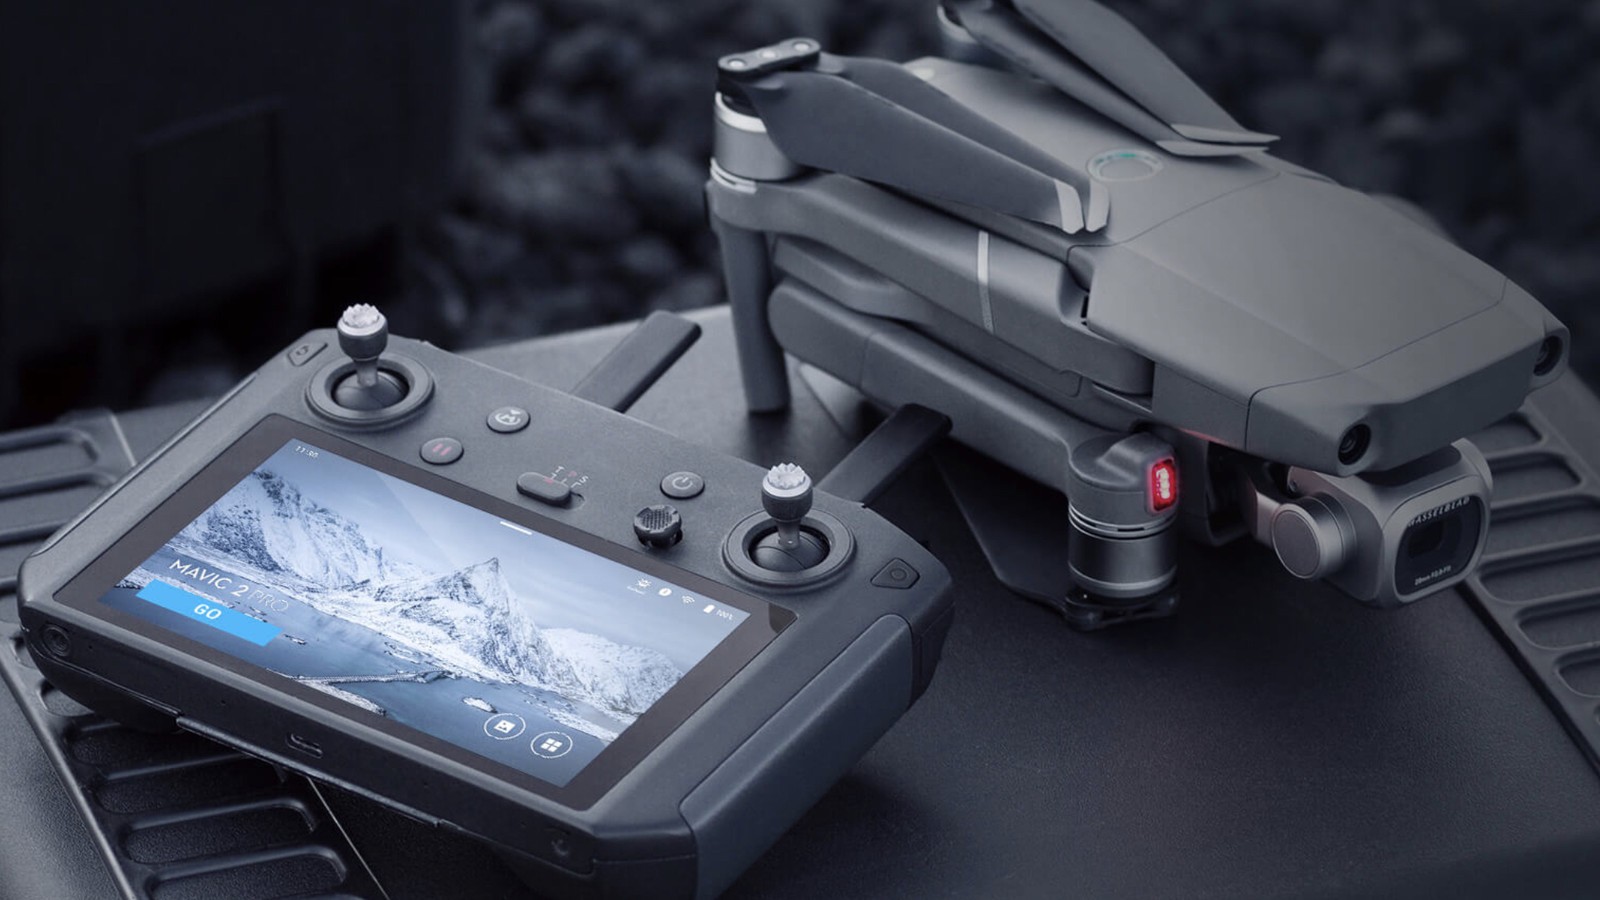 DJI Smart Controller - Leave the Smartphone Behind